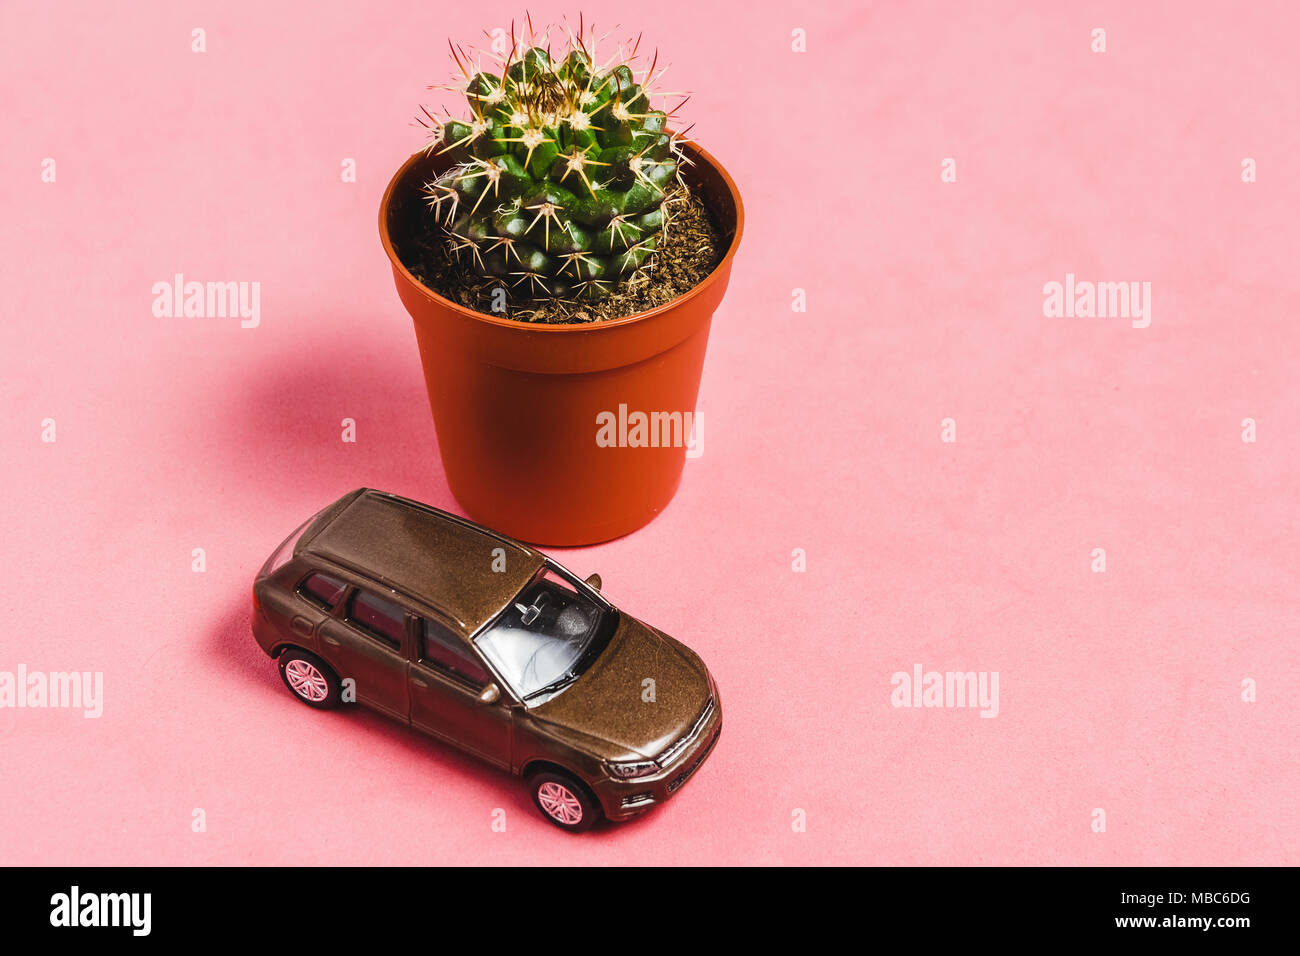 Closeup Cactus in Brown Vase with Model Car on Pink Backgrounf. Image for Nature, Nobody, Summer, Garden Concept. Stock Photo